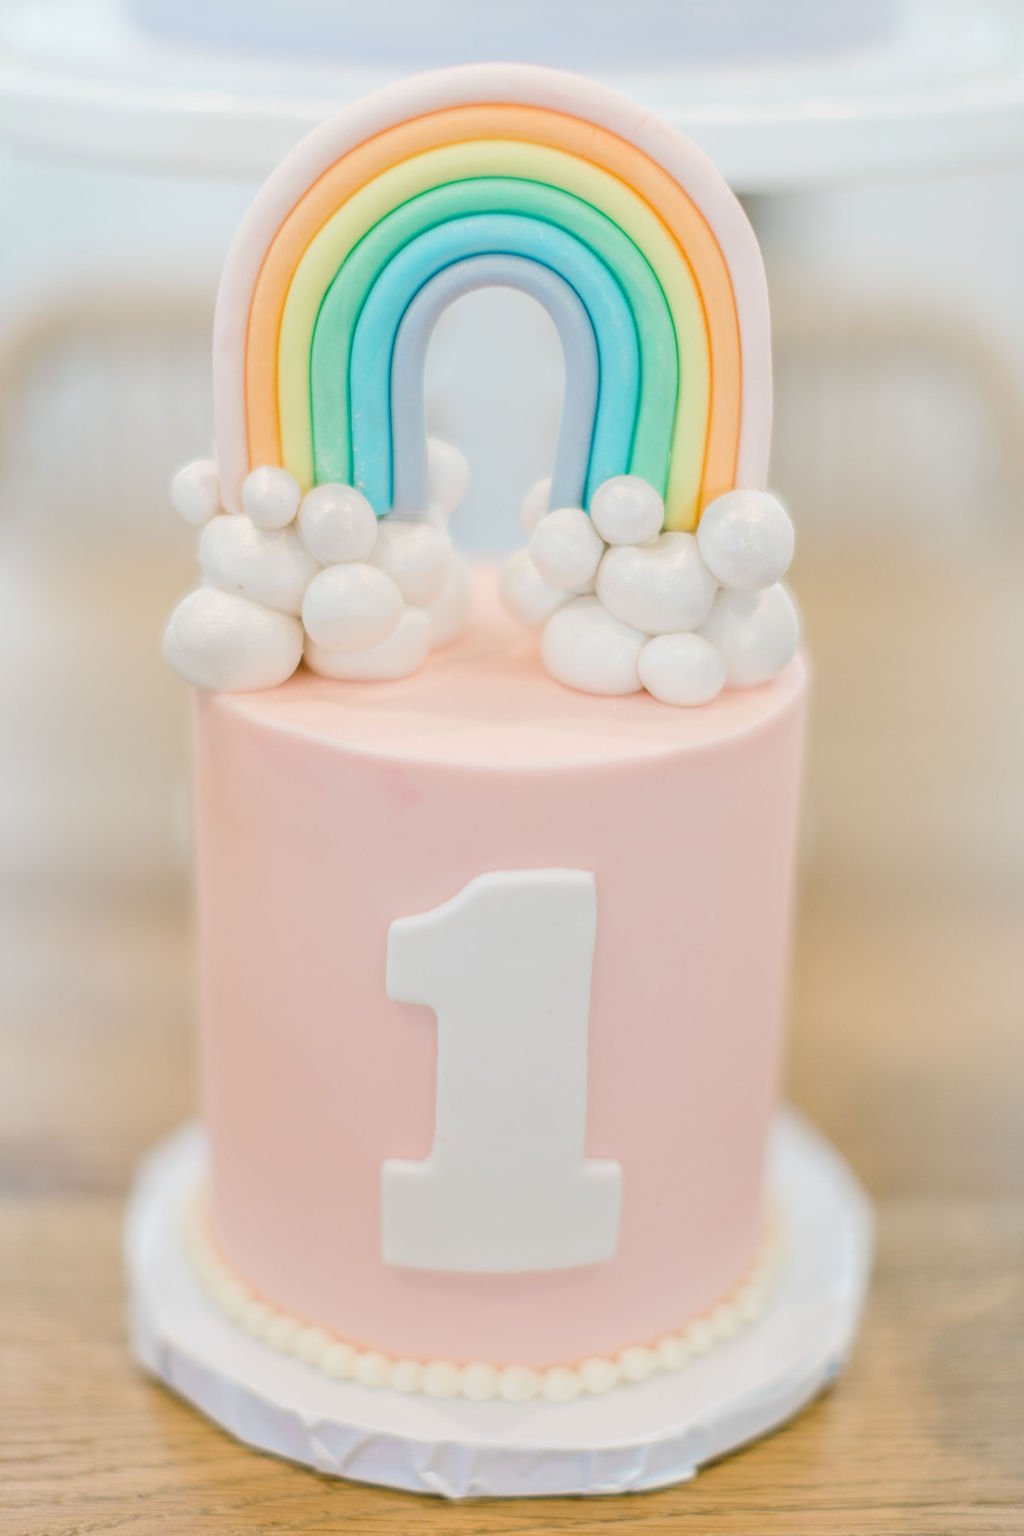 Rainbow First Birthday Smash Cake - get details and more Rainbow Party inspiration at www.minteventdesign.com!